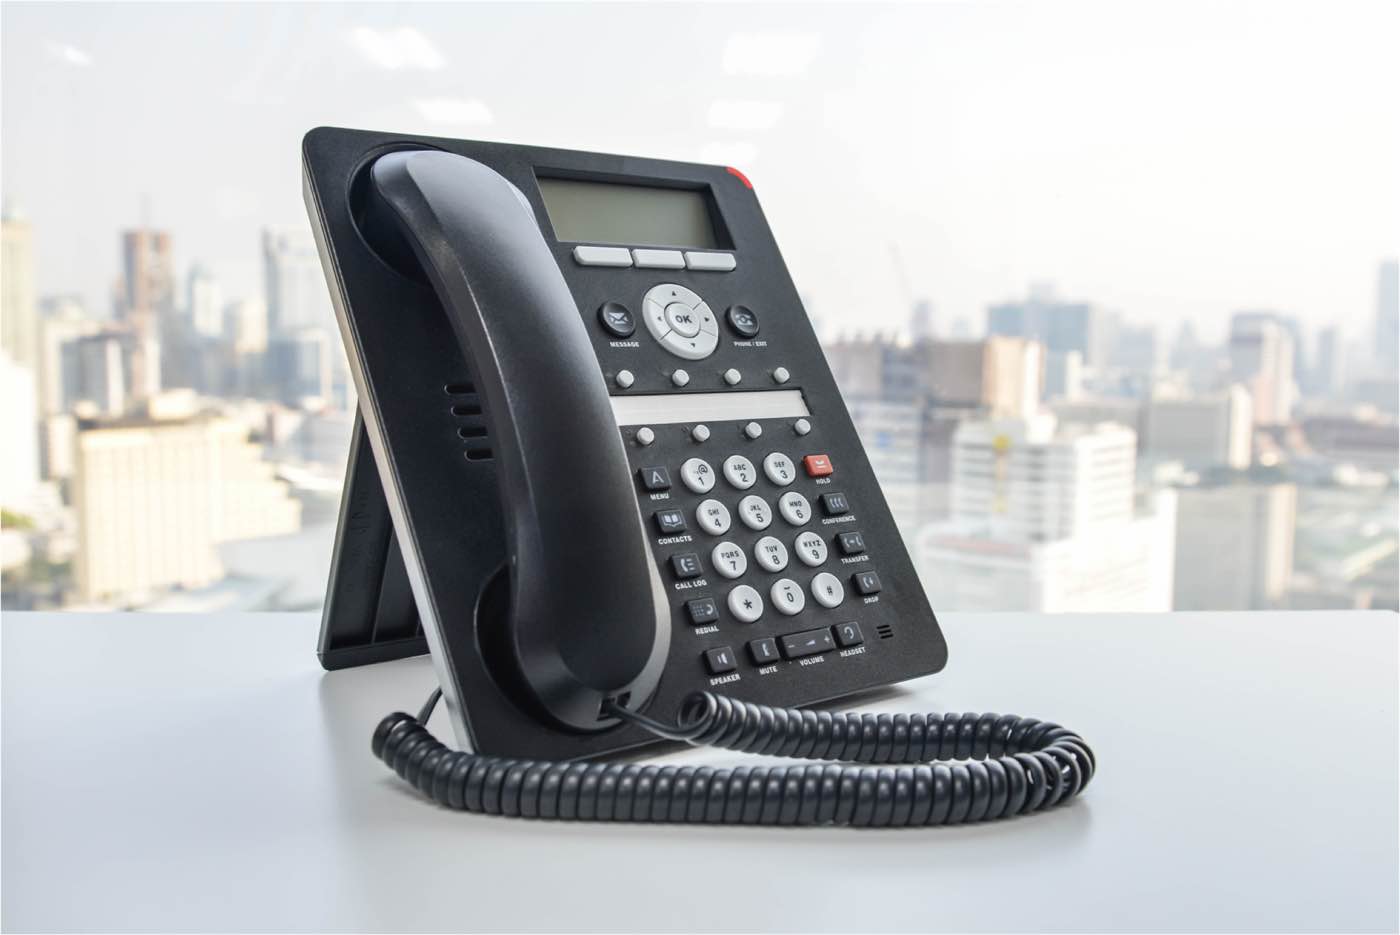 Hosted PBX phone systems are among the best phone options for small and mid-sized businesses. Contact Eberly Systems in Berks County, PA to learn more about affordable phone system options for small and medium businesses in Berks, Lancaster, Lebanon, Schuylkill, Lehigh, Montgomery and Chester counties.